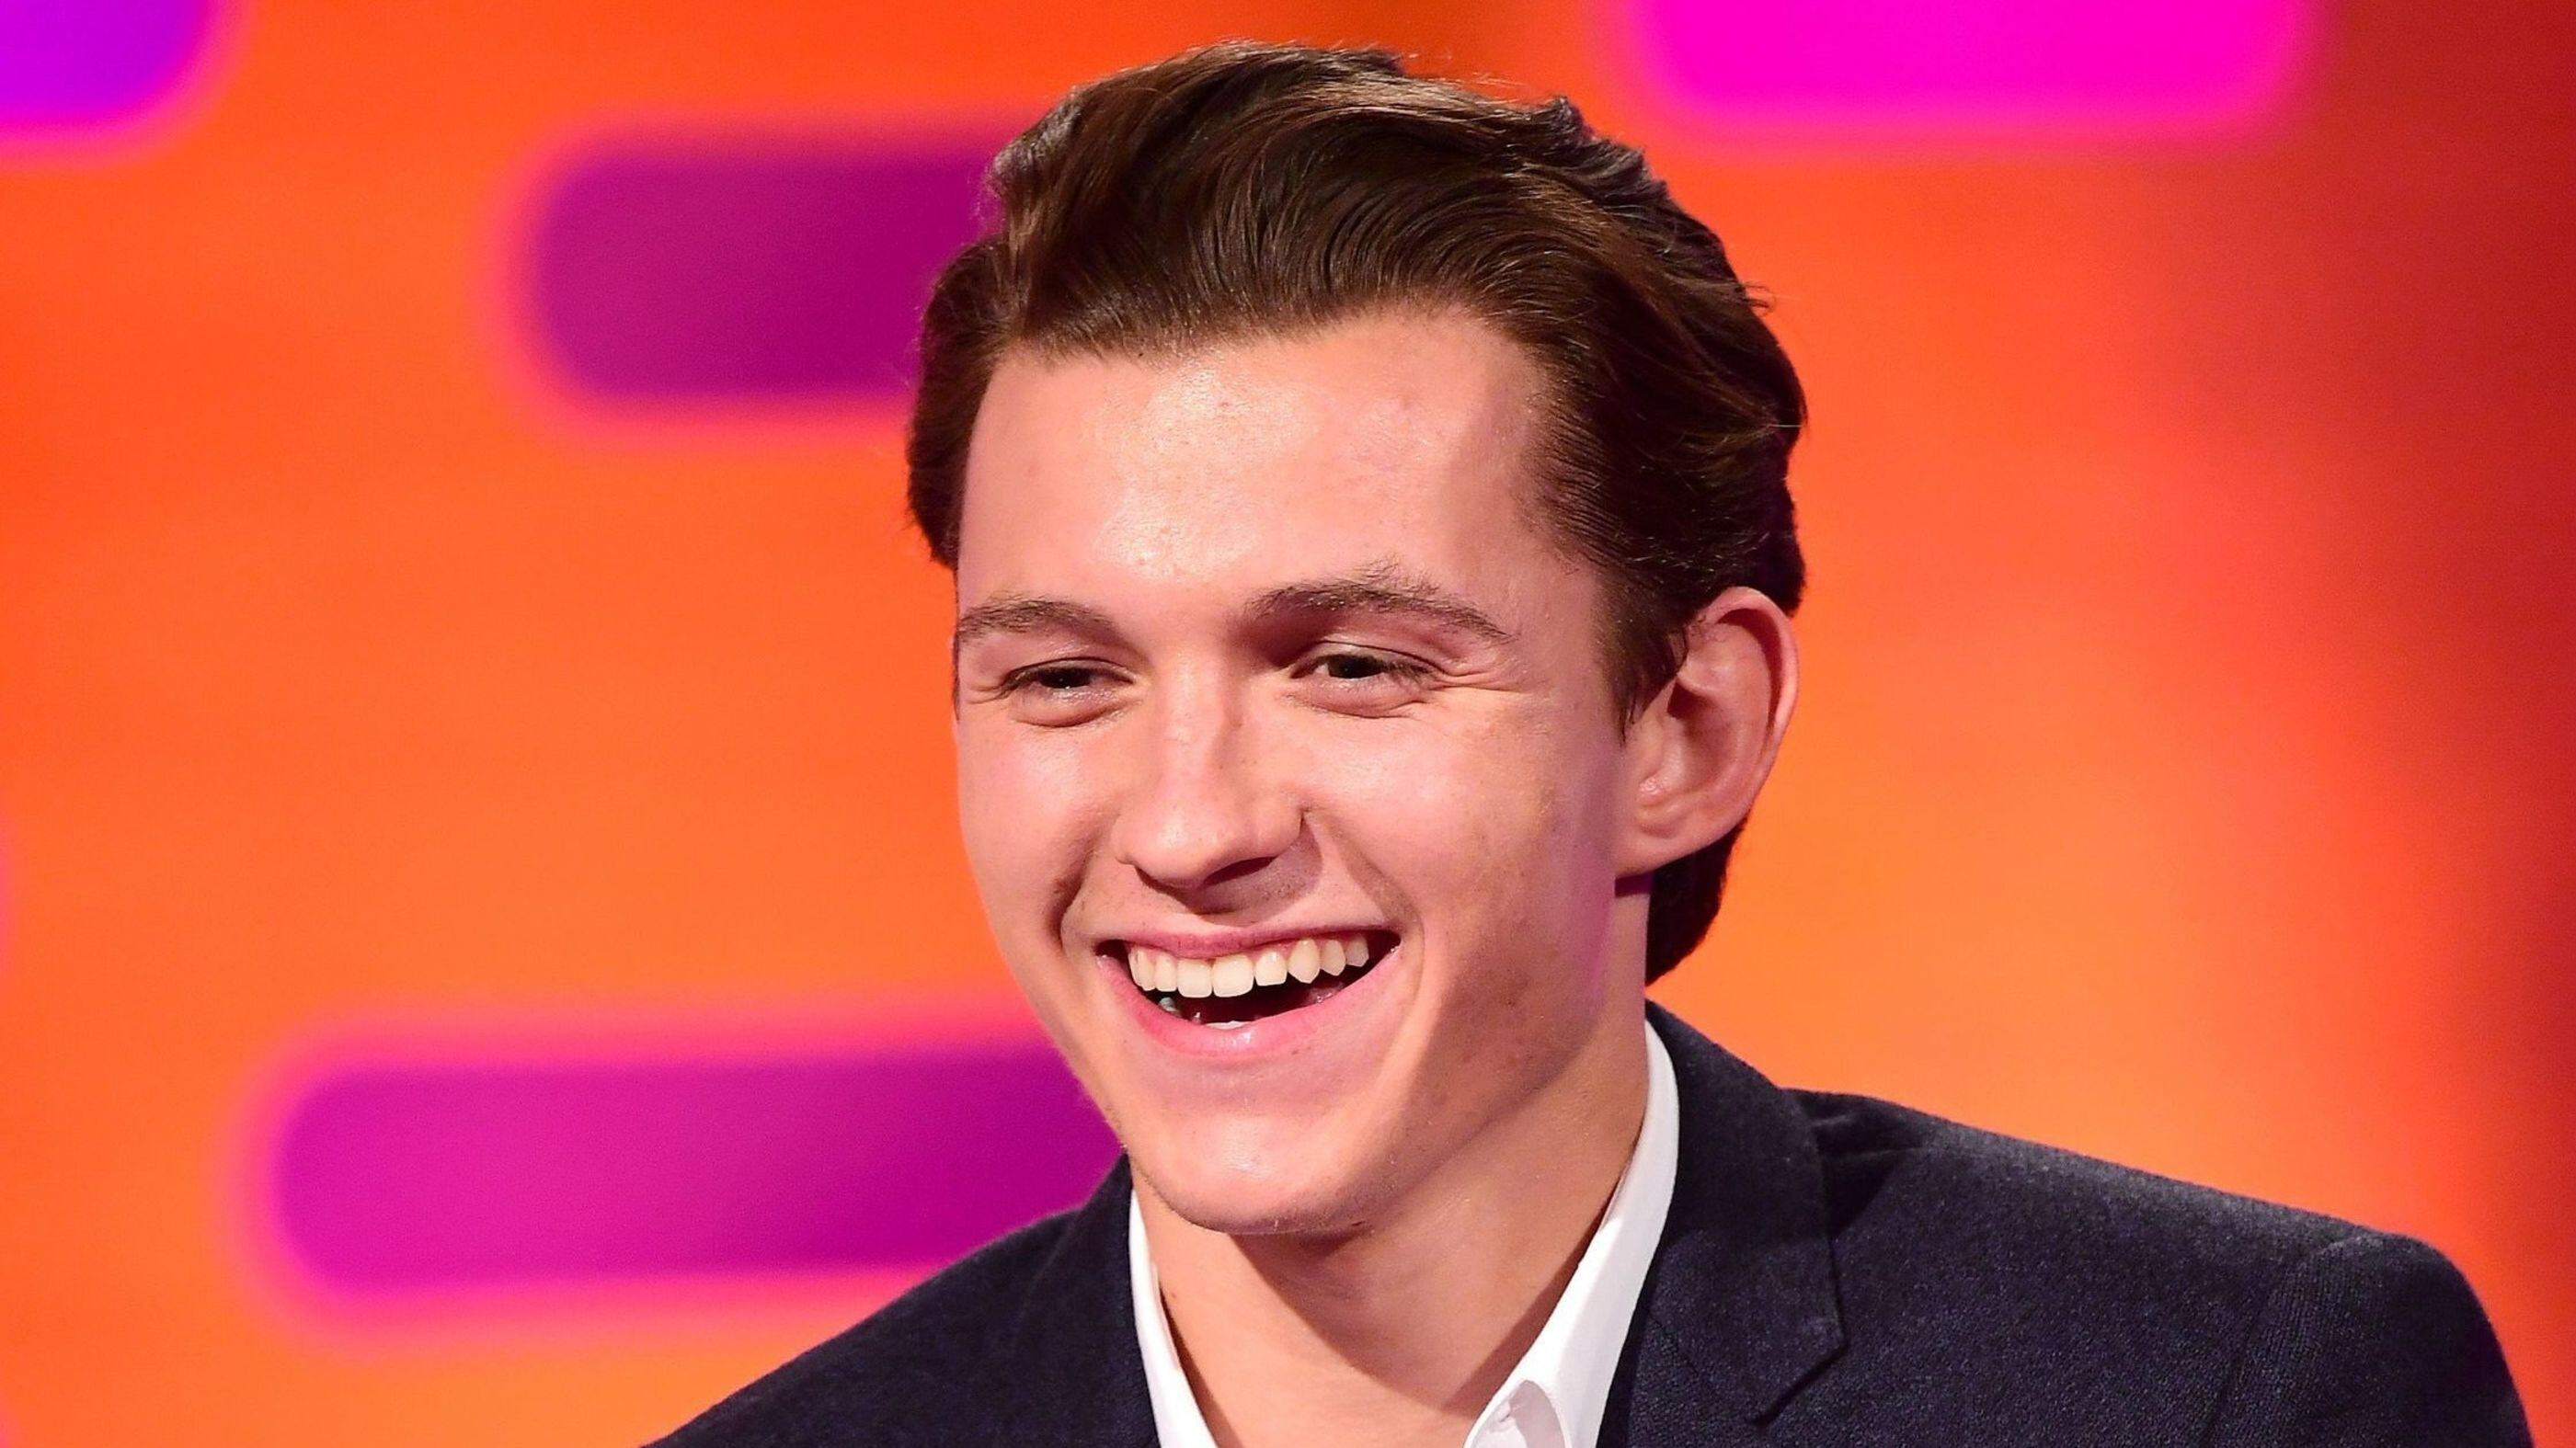 Tom Holland had fun with the online joke about him having frogs in his mouth.